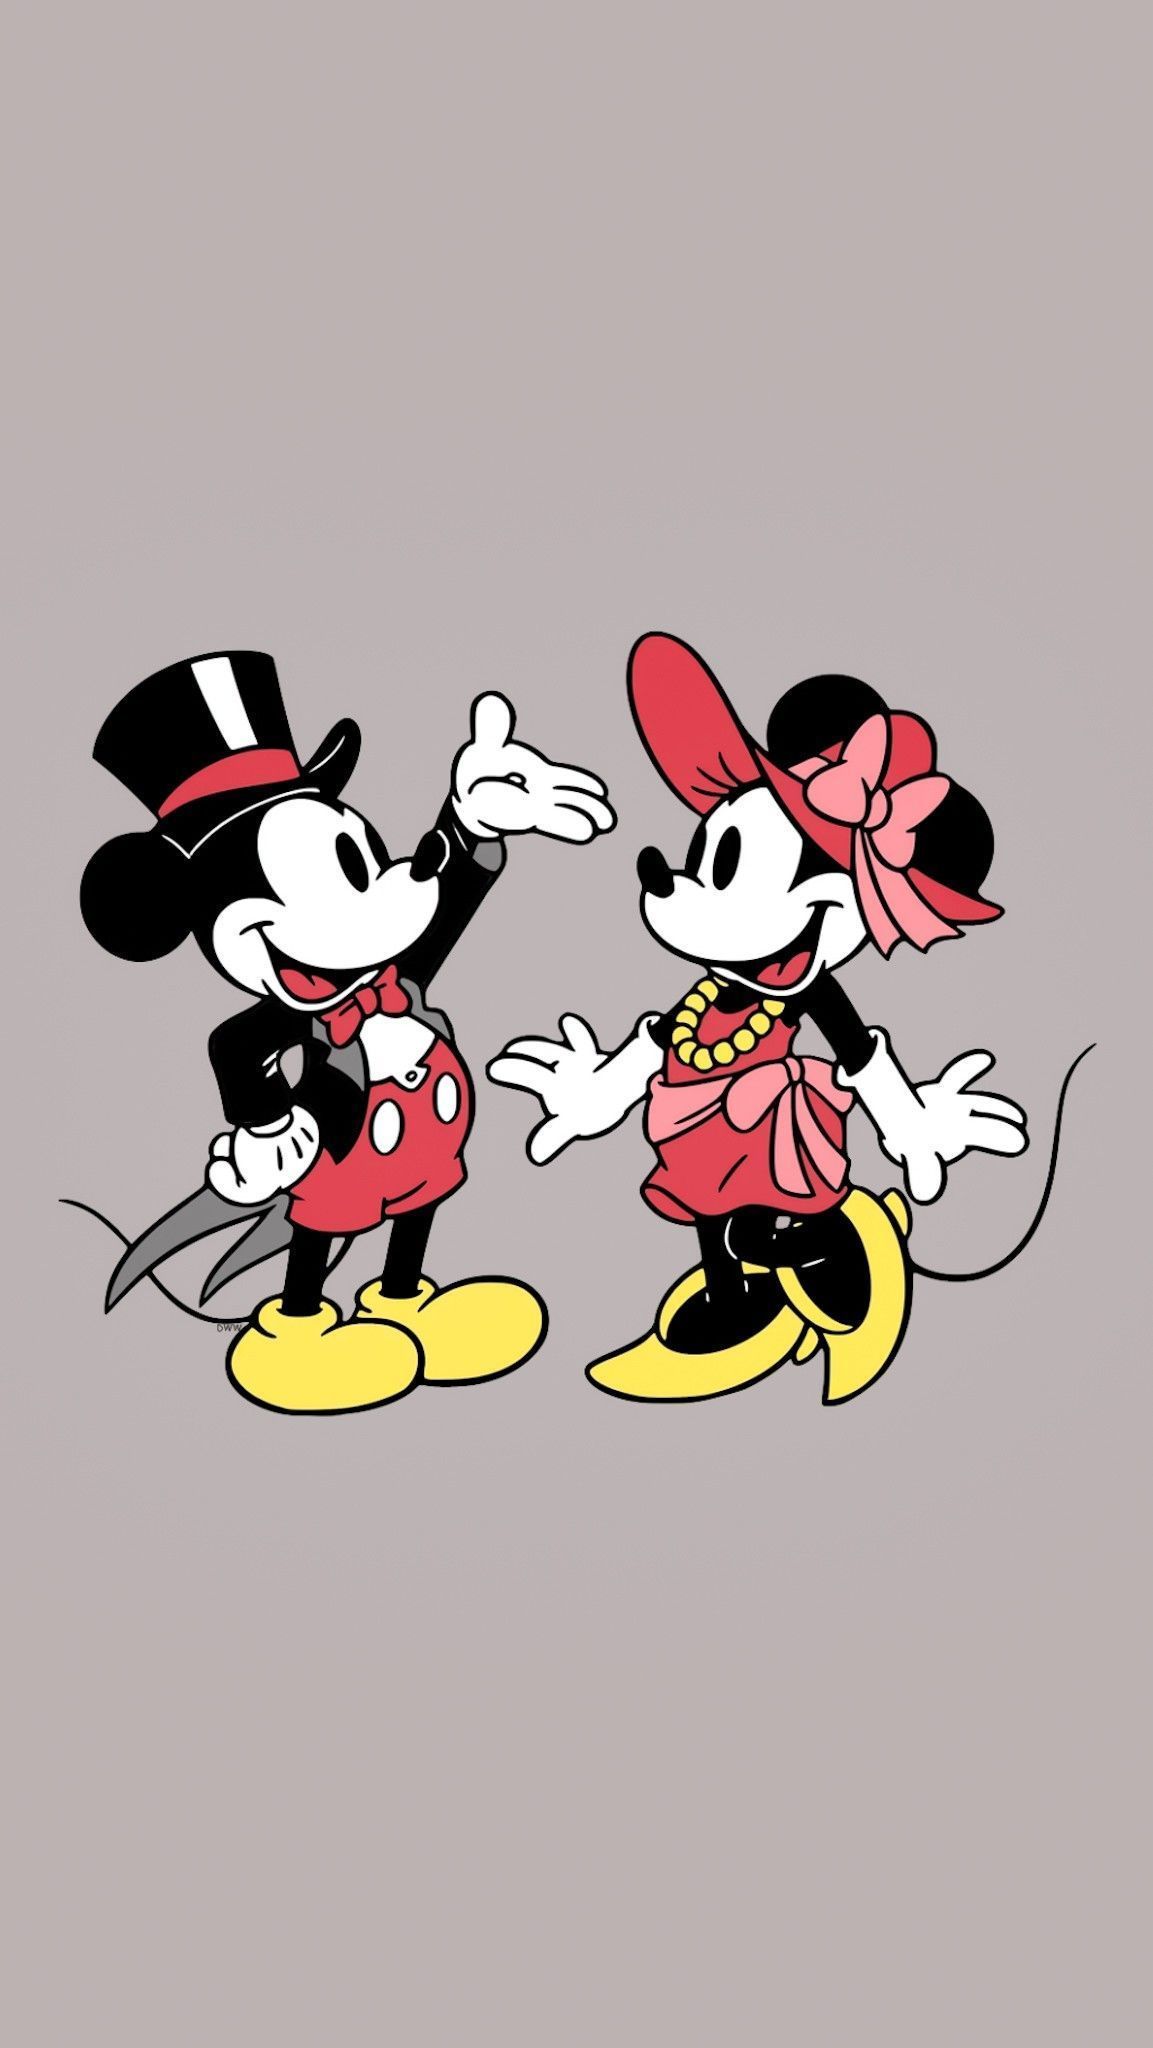 A cartoon of two mickey mouse characters - Mickey Mouse, Minnie Mouse